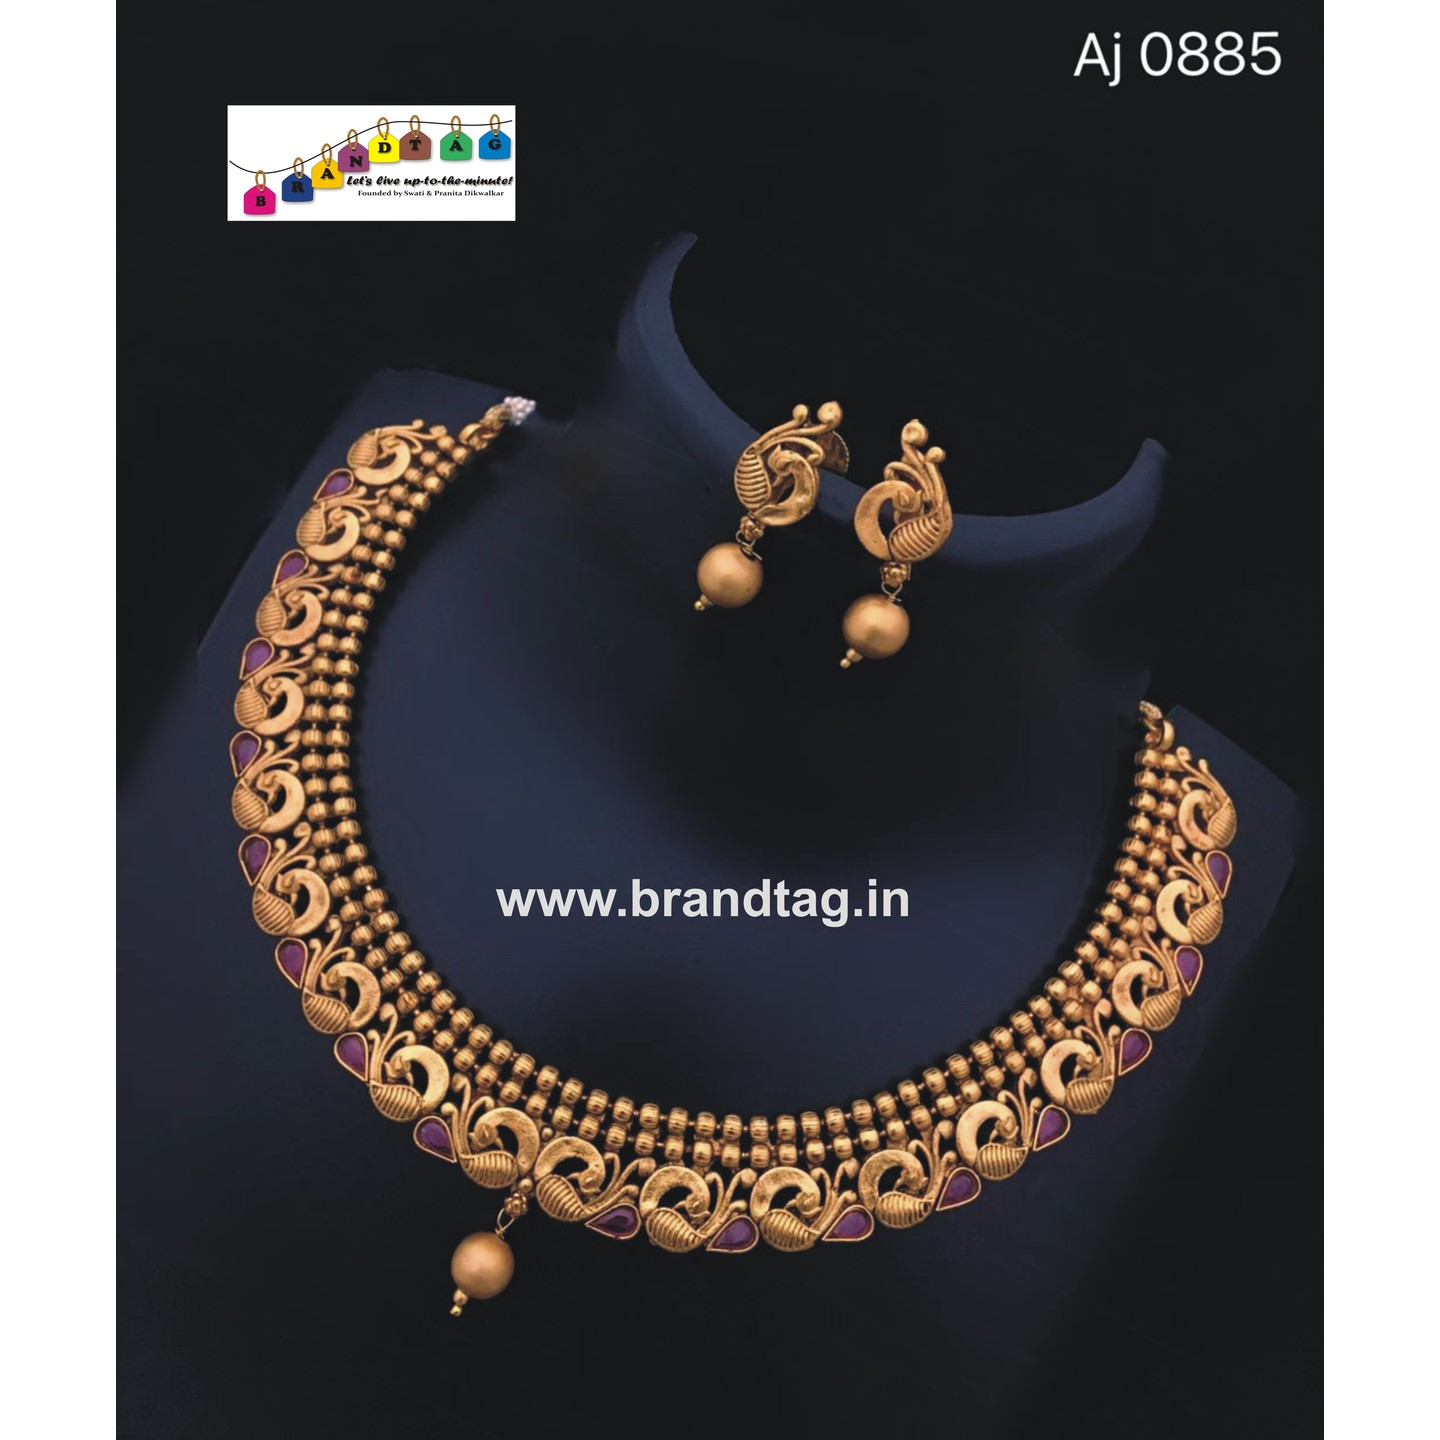 Special Ganesh Festival Collection ....Captivating simple yet beautifully designed Necklace set!! 